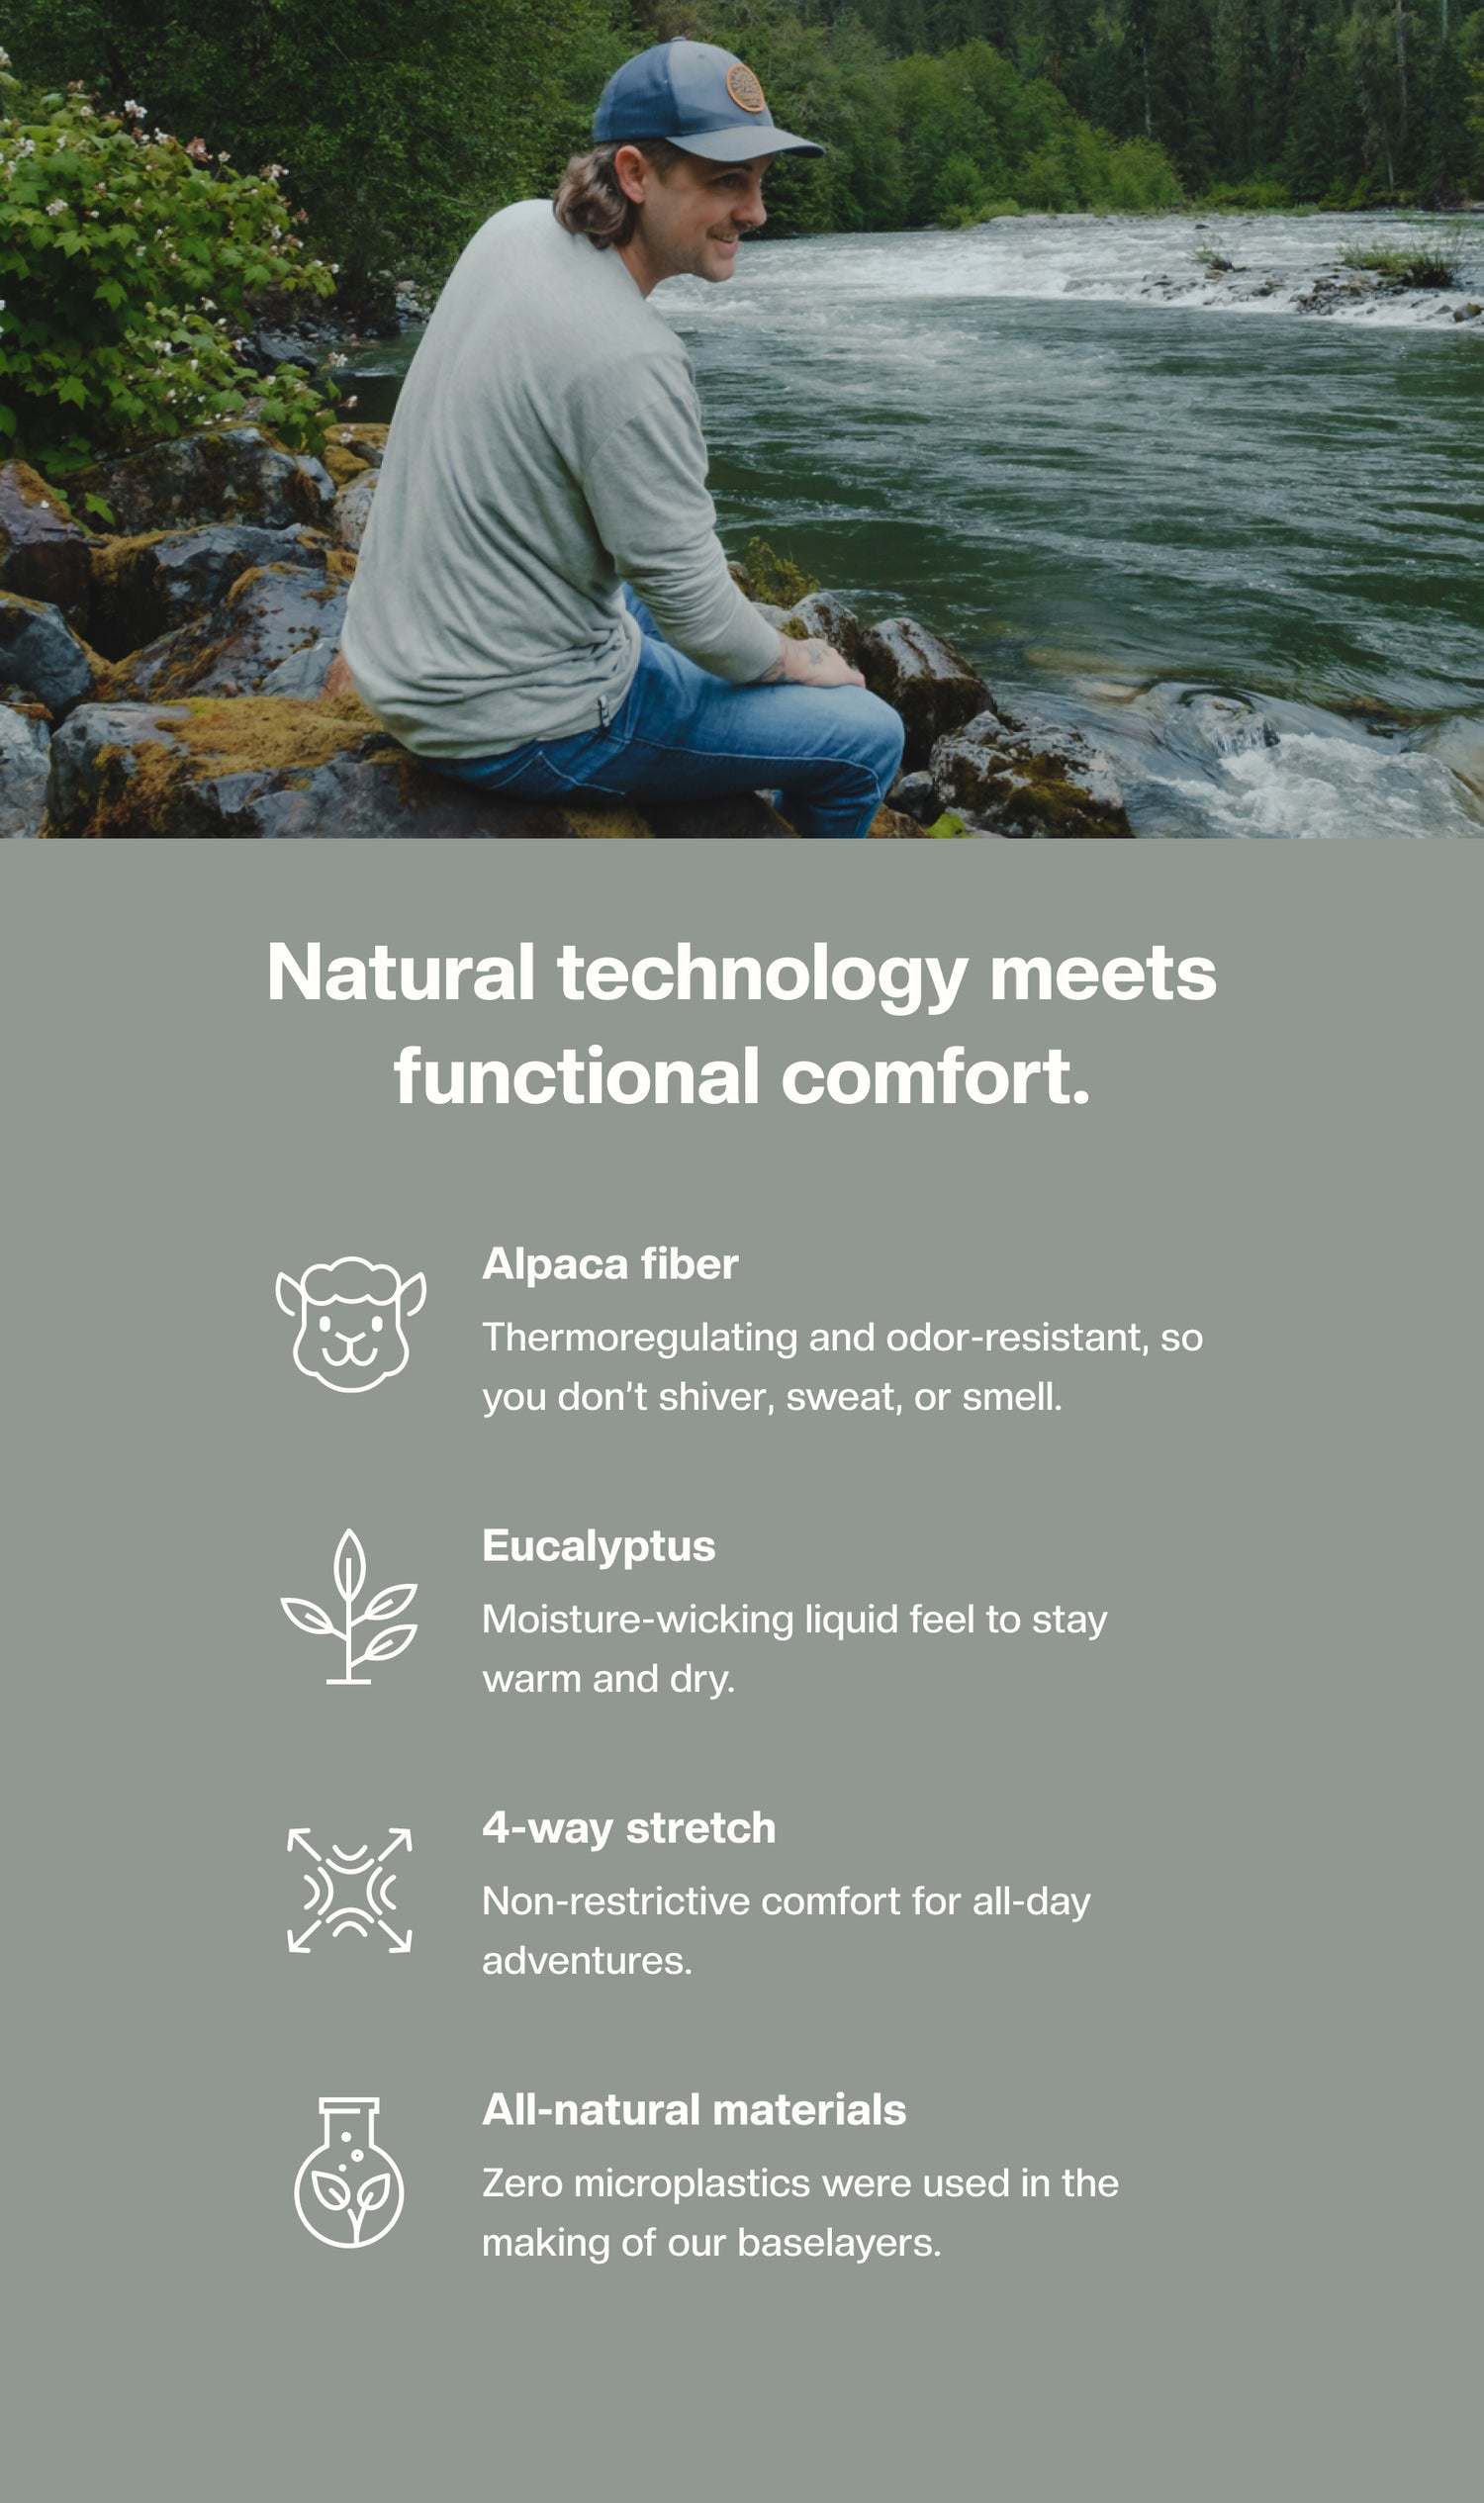 Natural technology functional comfort. Alpaca fiber: Thermoregulating and odor-resistant, so you don't shiver, sweat or smell. Eucalyptus: Moisture-wicking liquid feel to stay warm and dry. 4-way stretch: Non-restrictive comfort for all-day adventures. All-natural materials: Zero microplastics were used in the making of our baselayers